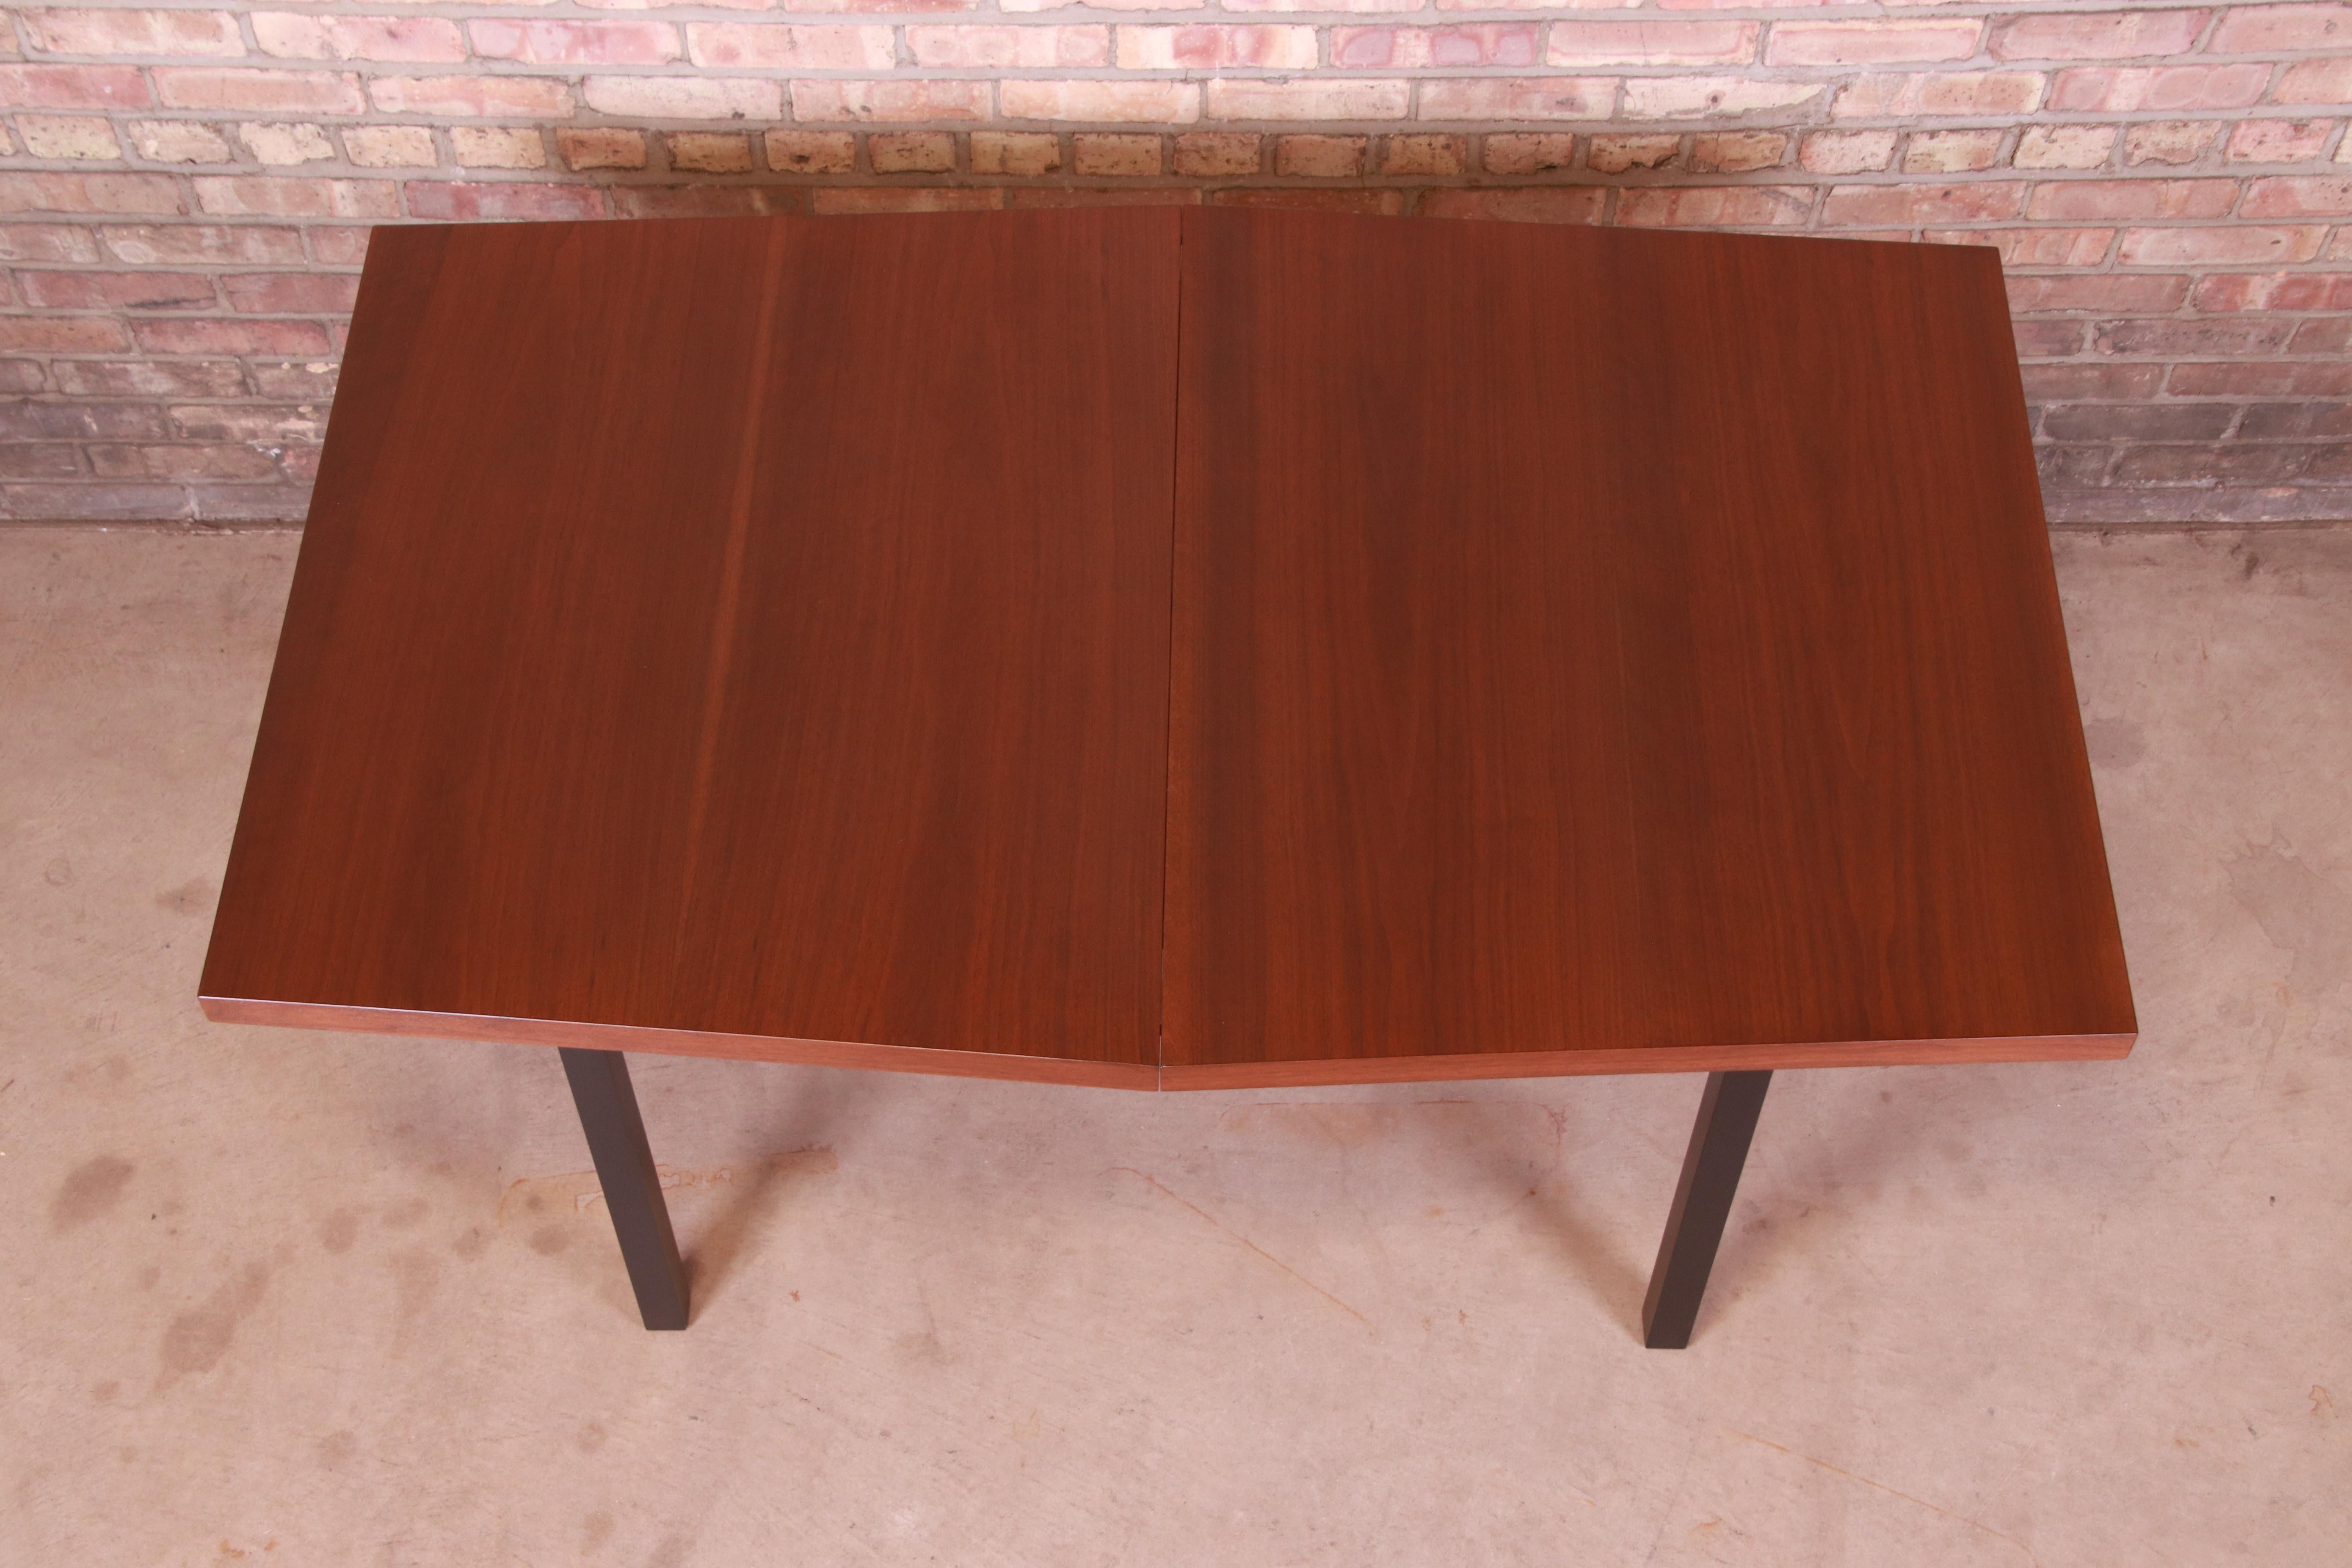 Milo Baughman for Directional Walnut Boat-Shaped Dining Table, Newly Refinished For Sale 8